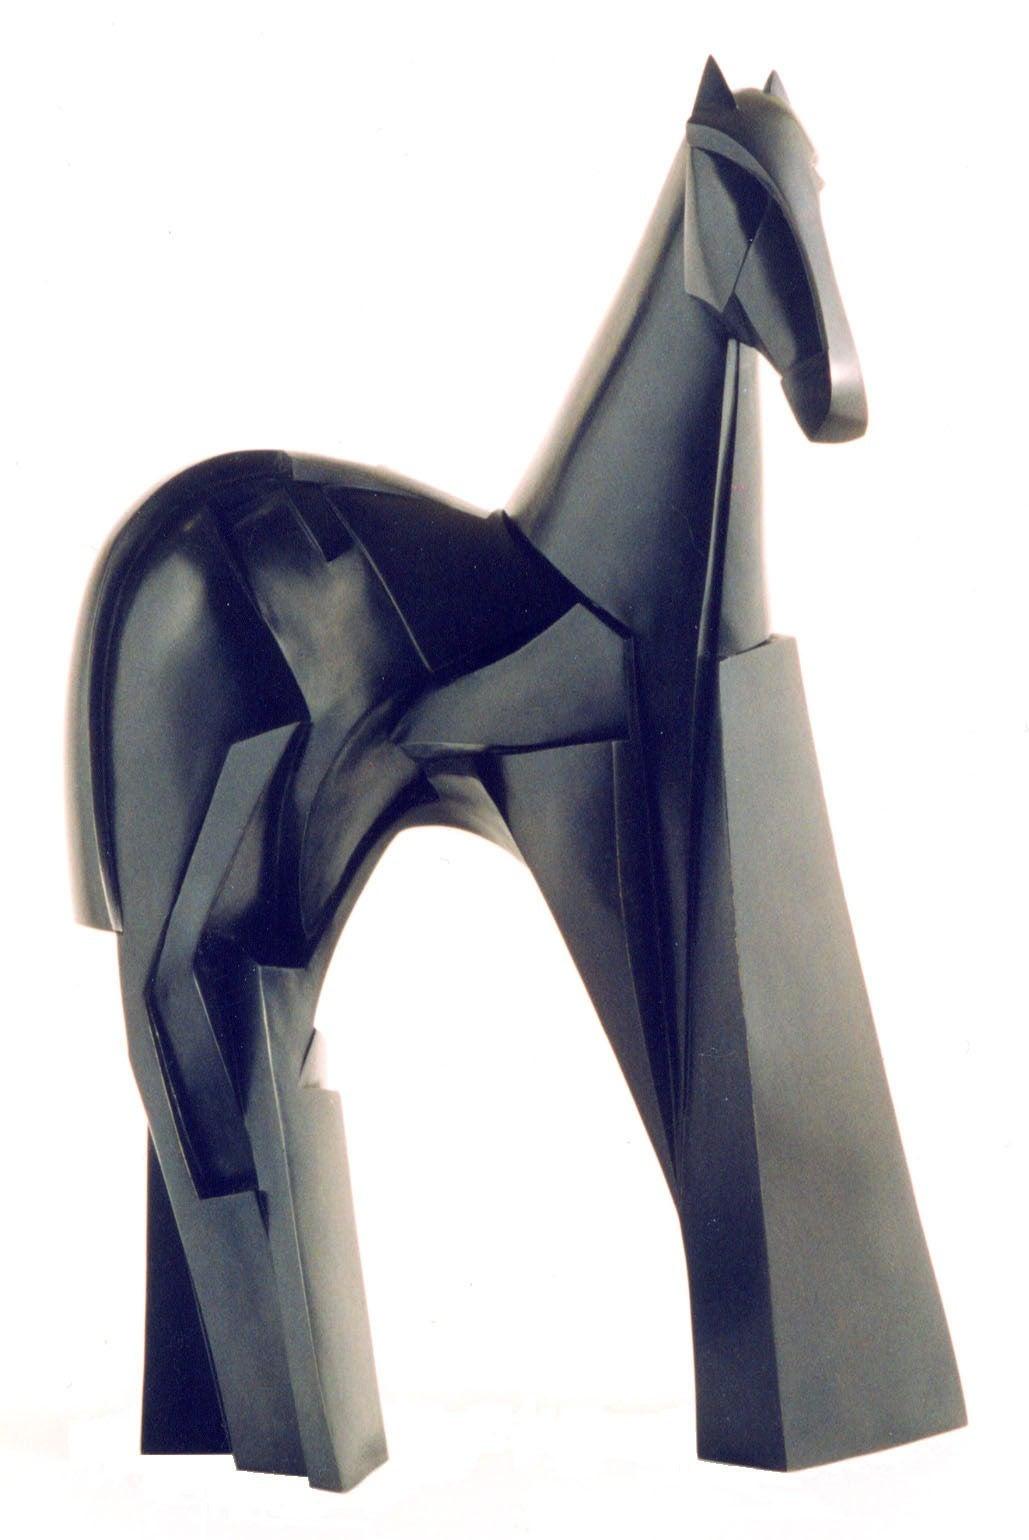 Xsakioro by Jacques Owczarek - Animal bronze black sculpture of a horse, smooth For Sale 1